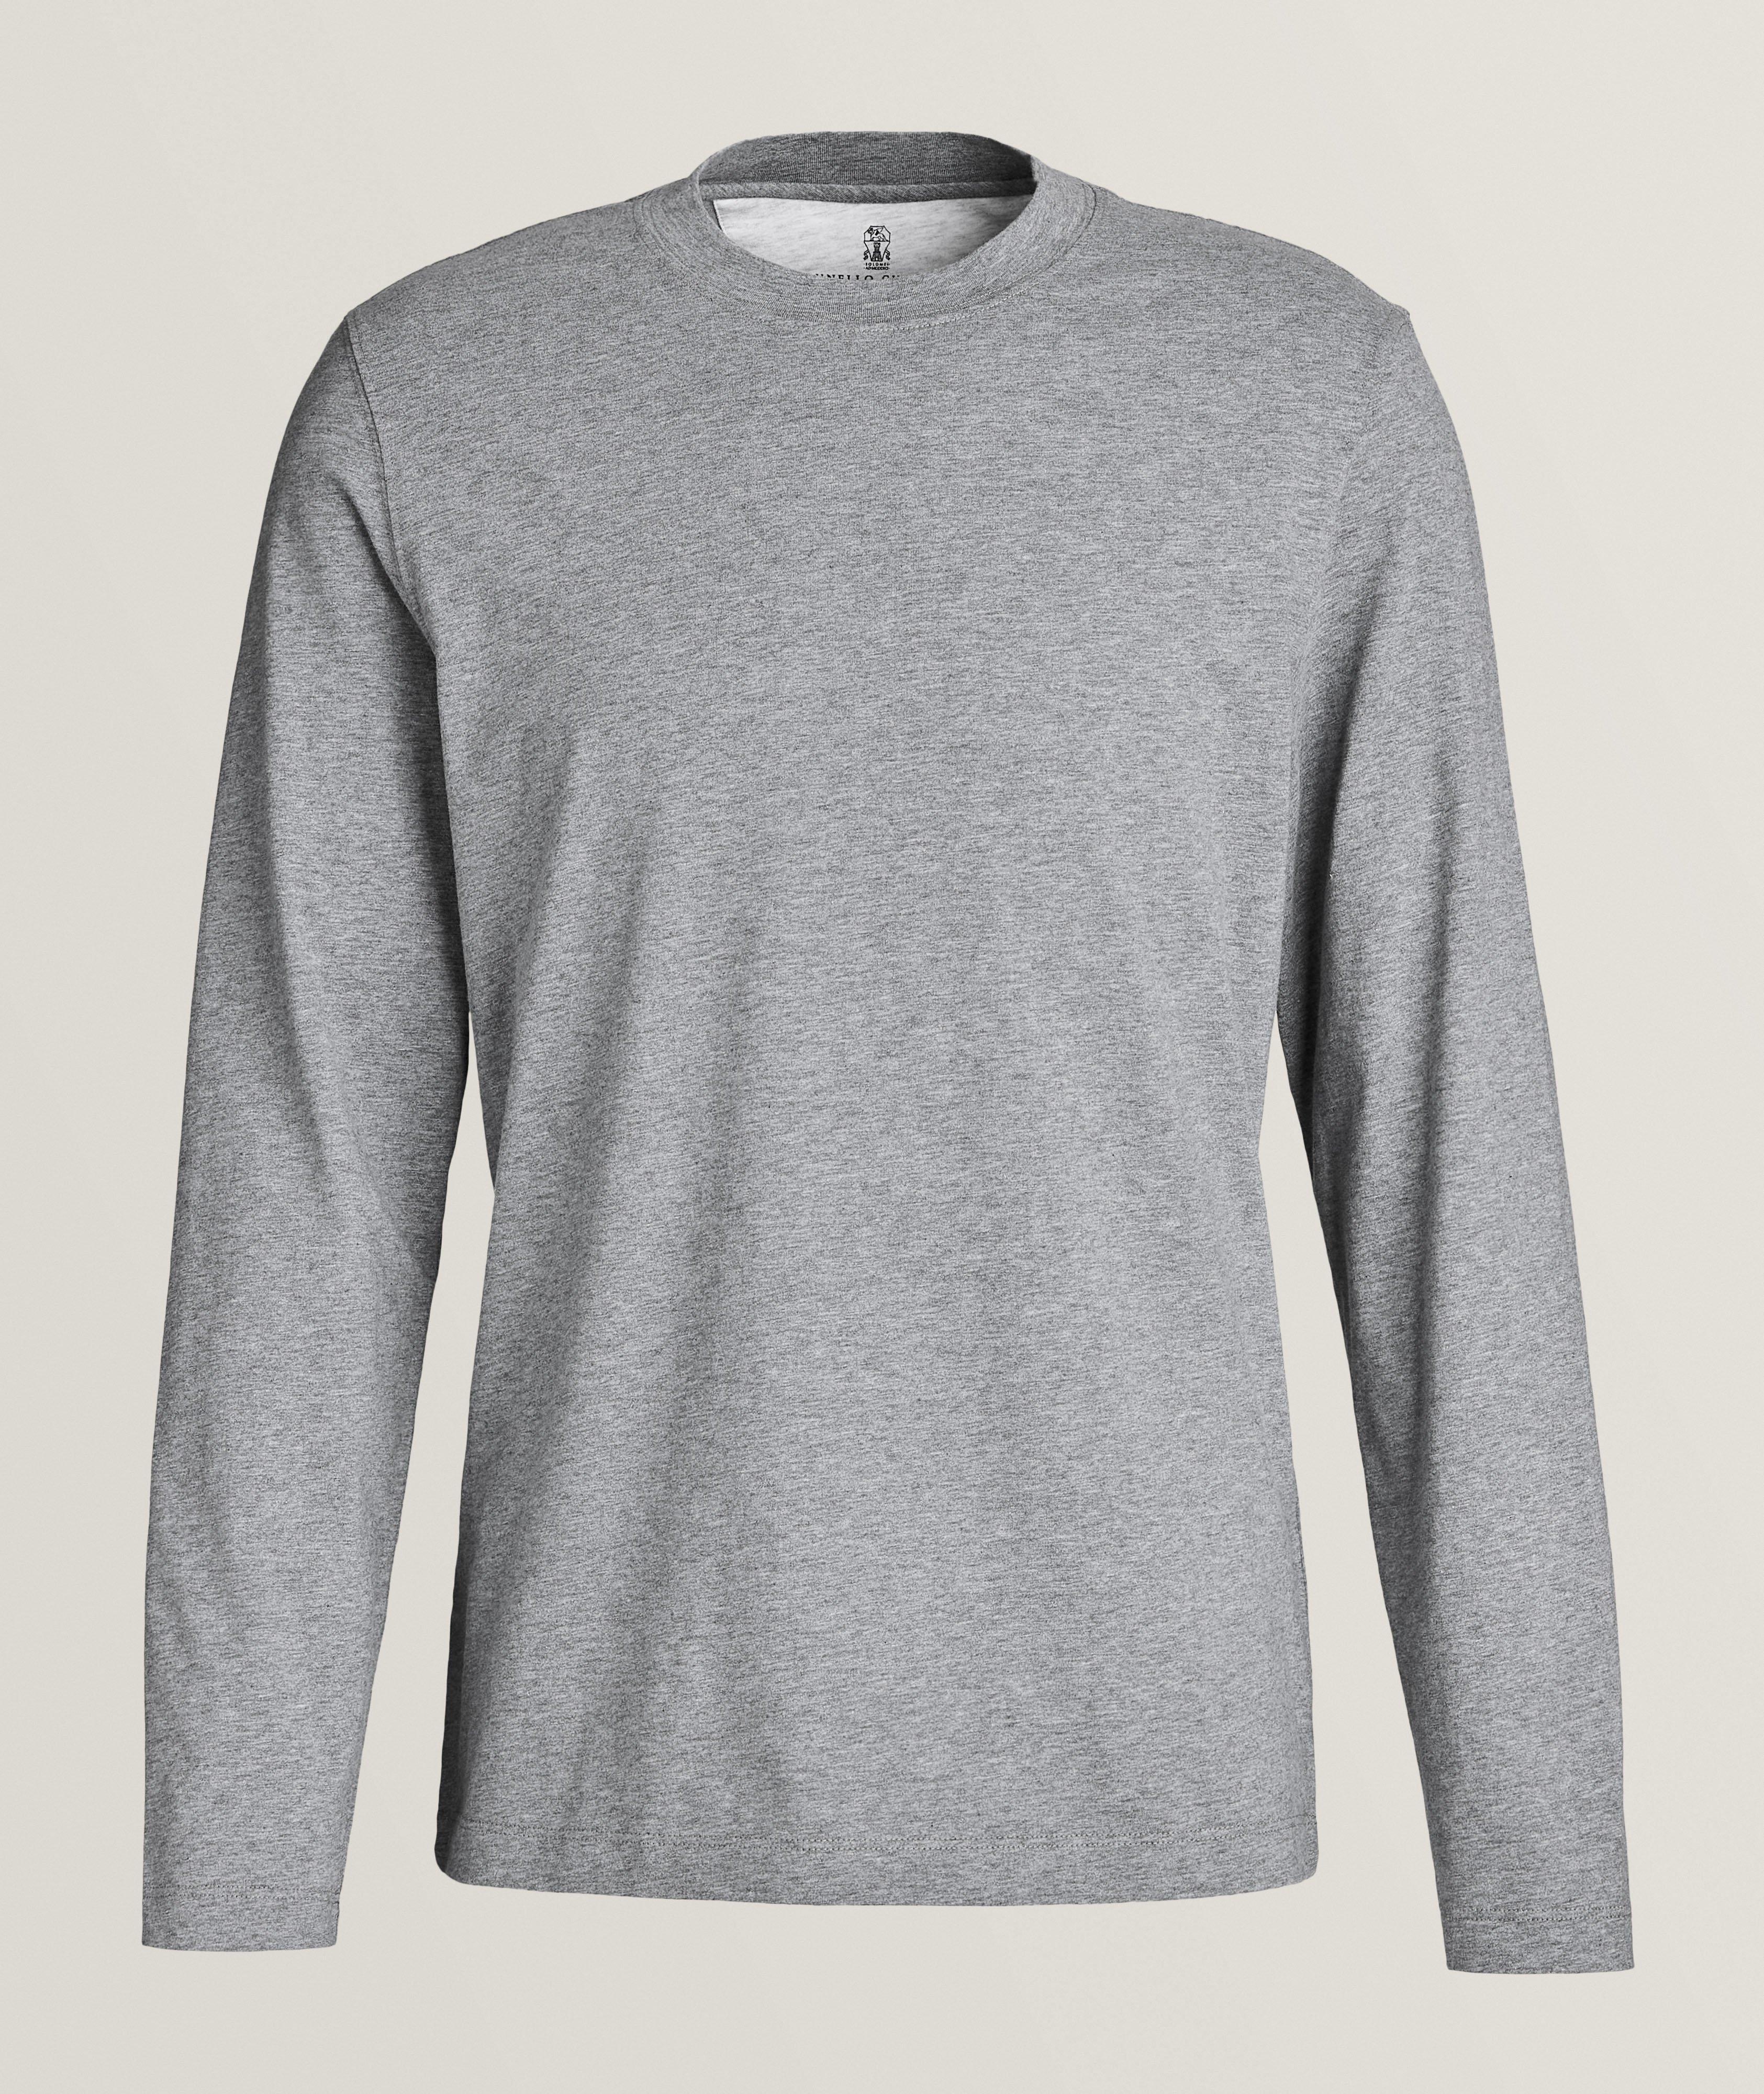 Essential Long-Sleeve Jersey Cotton T-Shirt  image 0